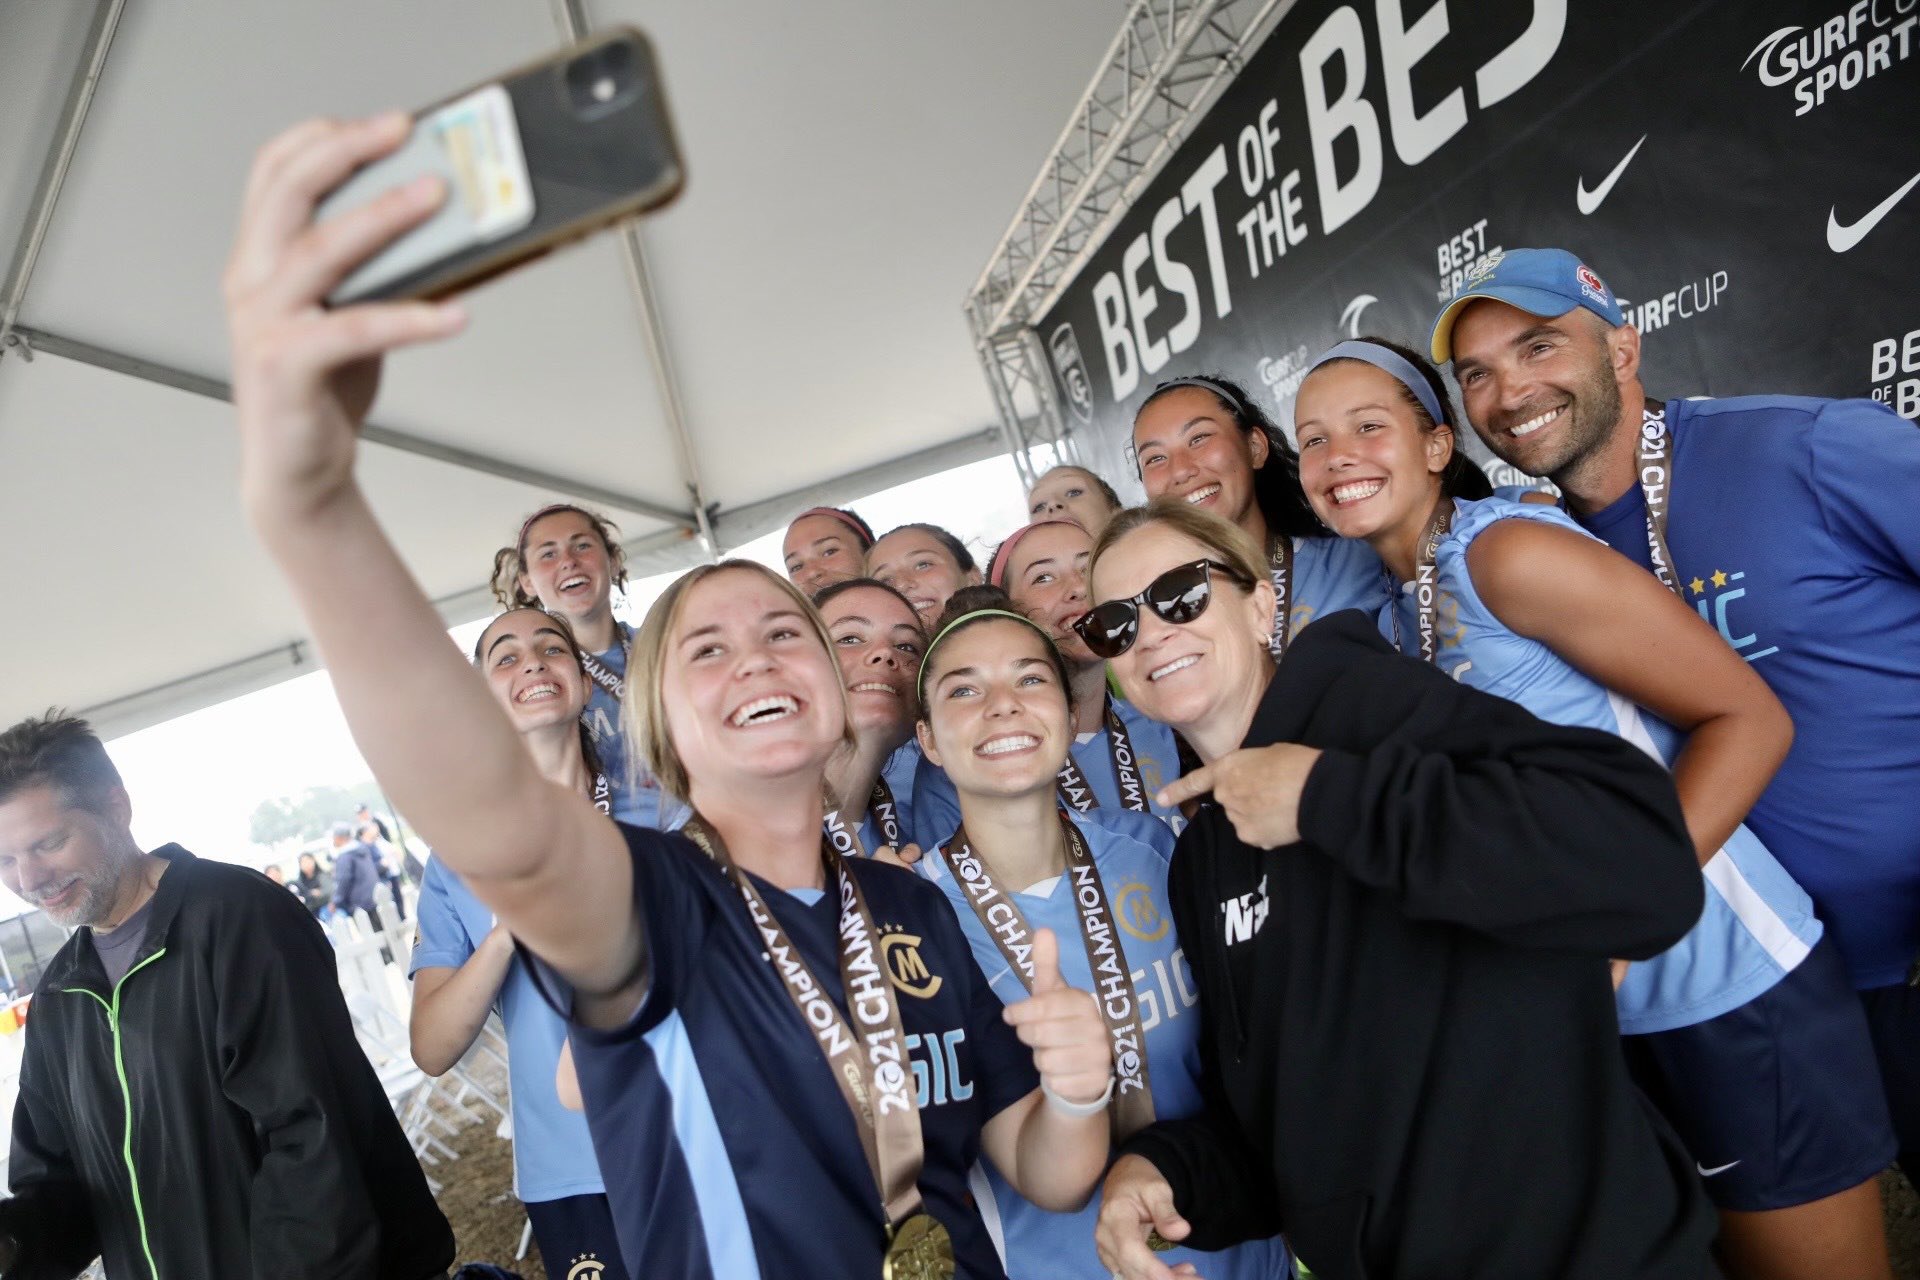 Want to Choose the Name for NWSL San Diego? Here’s your chance